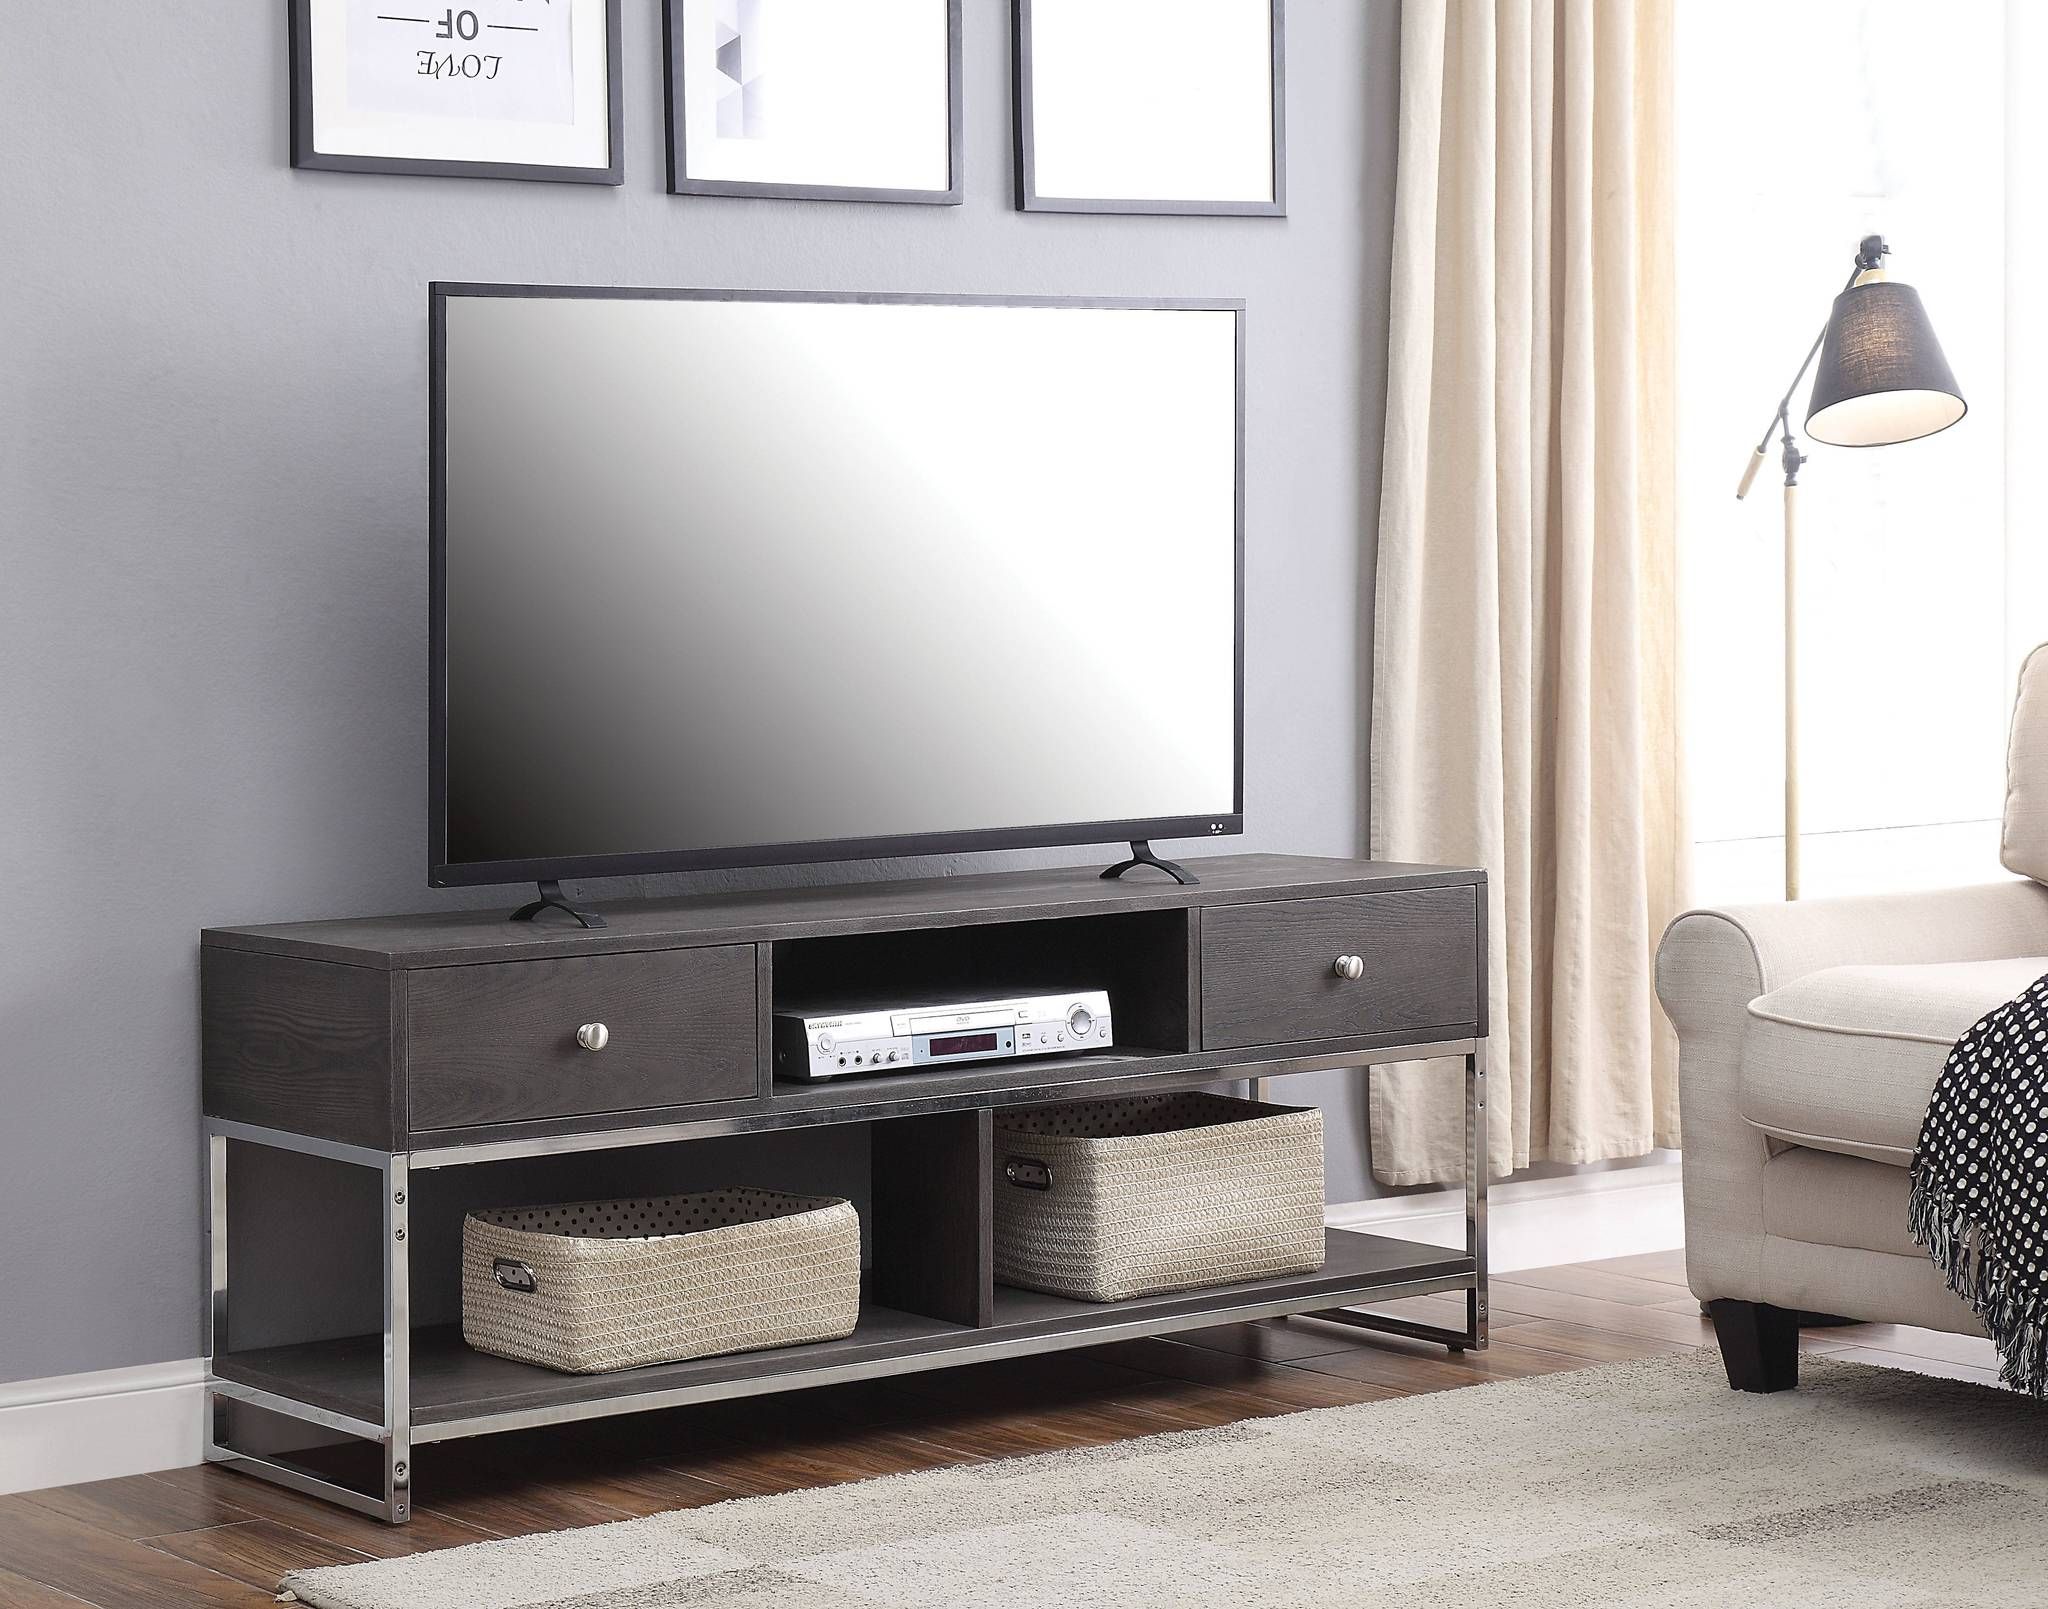 91204 Iban Gray Wood Metal Finish Modern Tv Stand Within Grey Wooden Tv Stands (View 5 of 15)